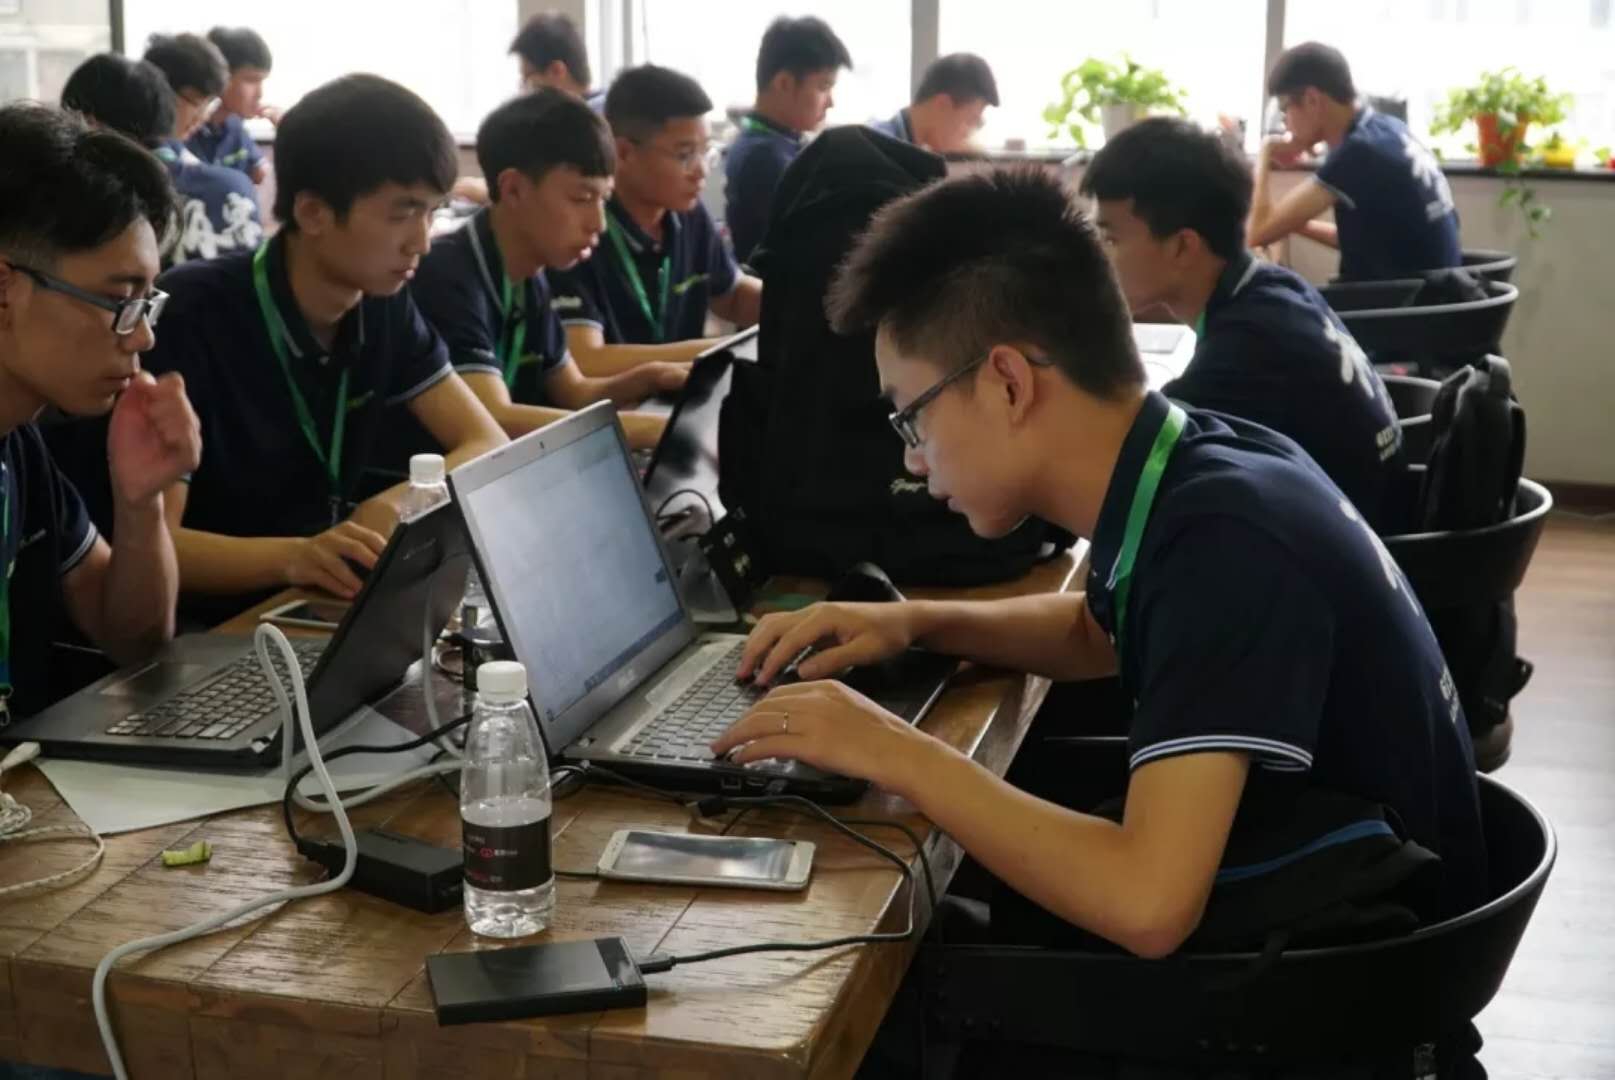 100+ Coders Gather in China to Build Apps Tied to the Bitcoin Cash Network